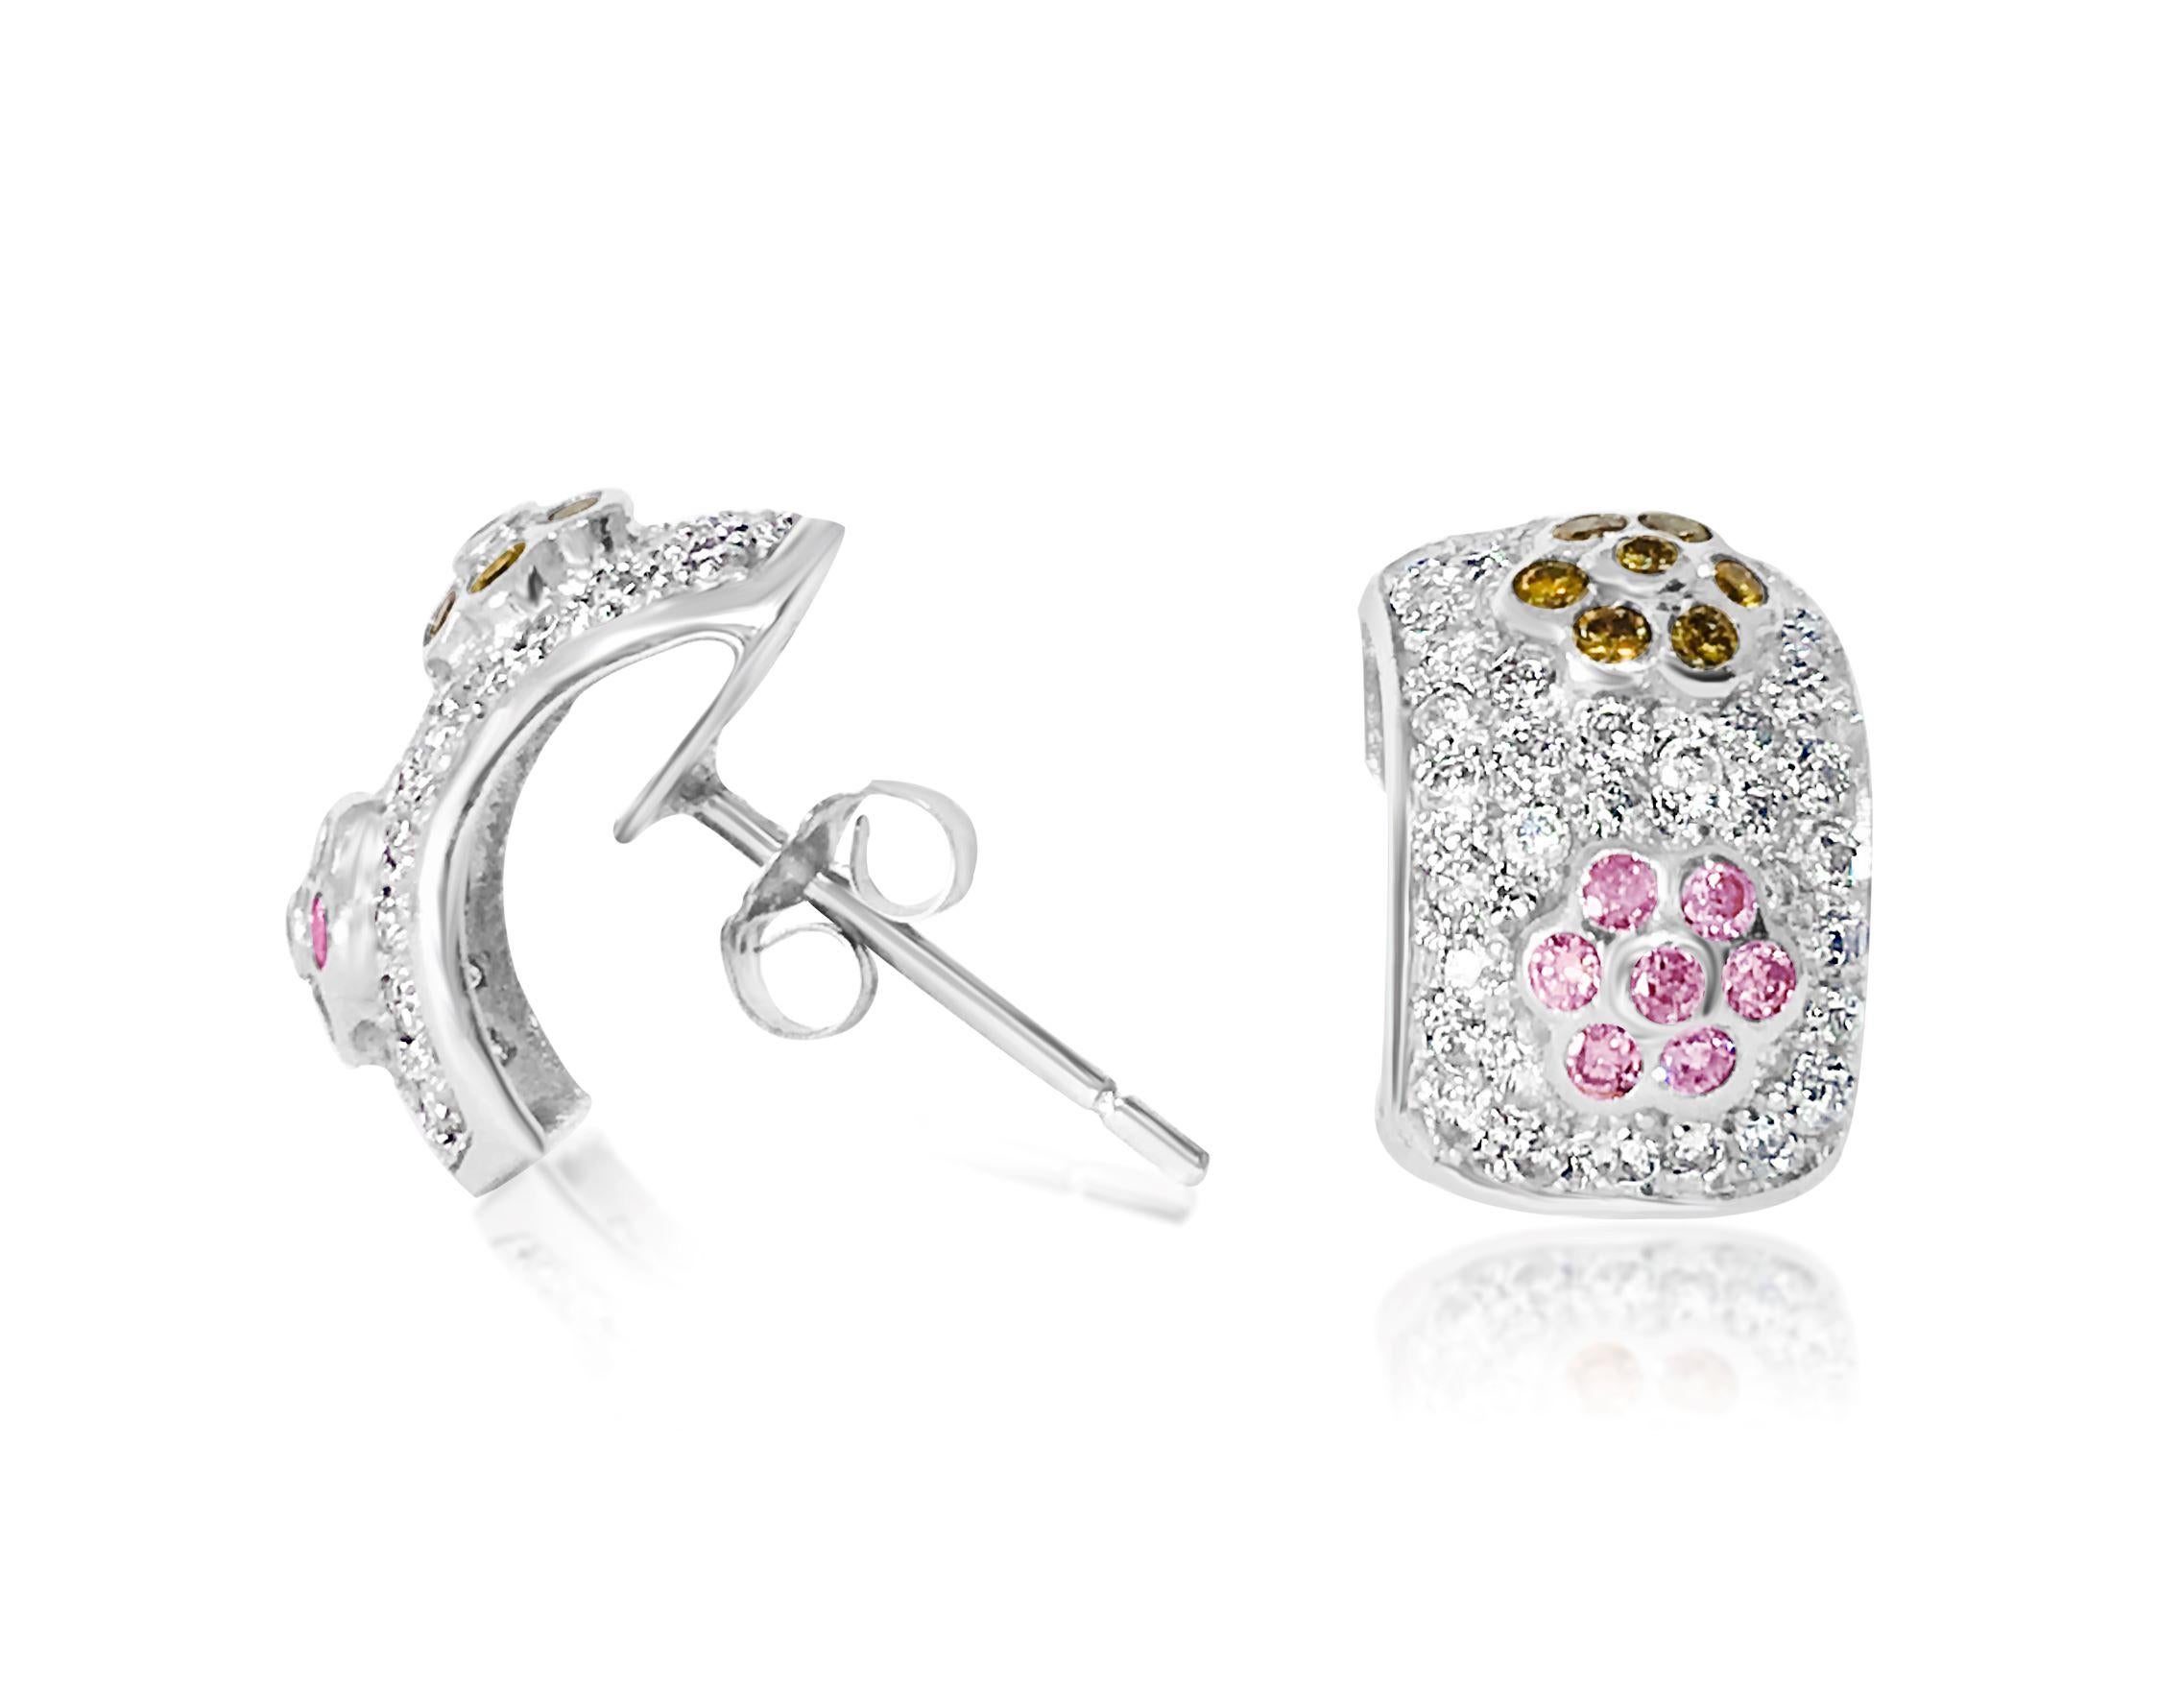 Metal: 14K white gold. 
White diamonds. Pink and Yellow Sapphire 
Total carat weight of all stones: 2.00 carats. 
SI clarity and G color white diamonds. 
All stones are 100% natural earth mined. 

Butterfly push back

Top of the line